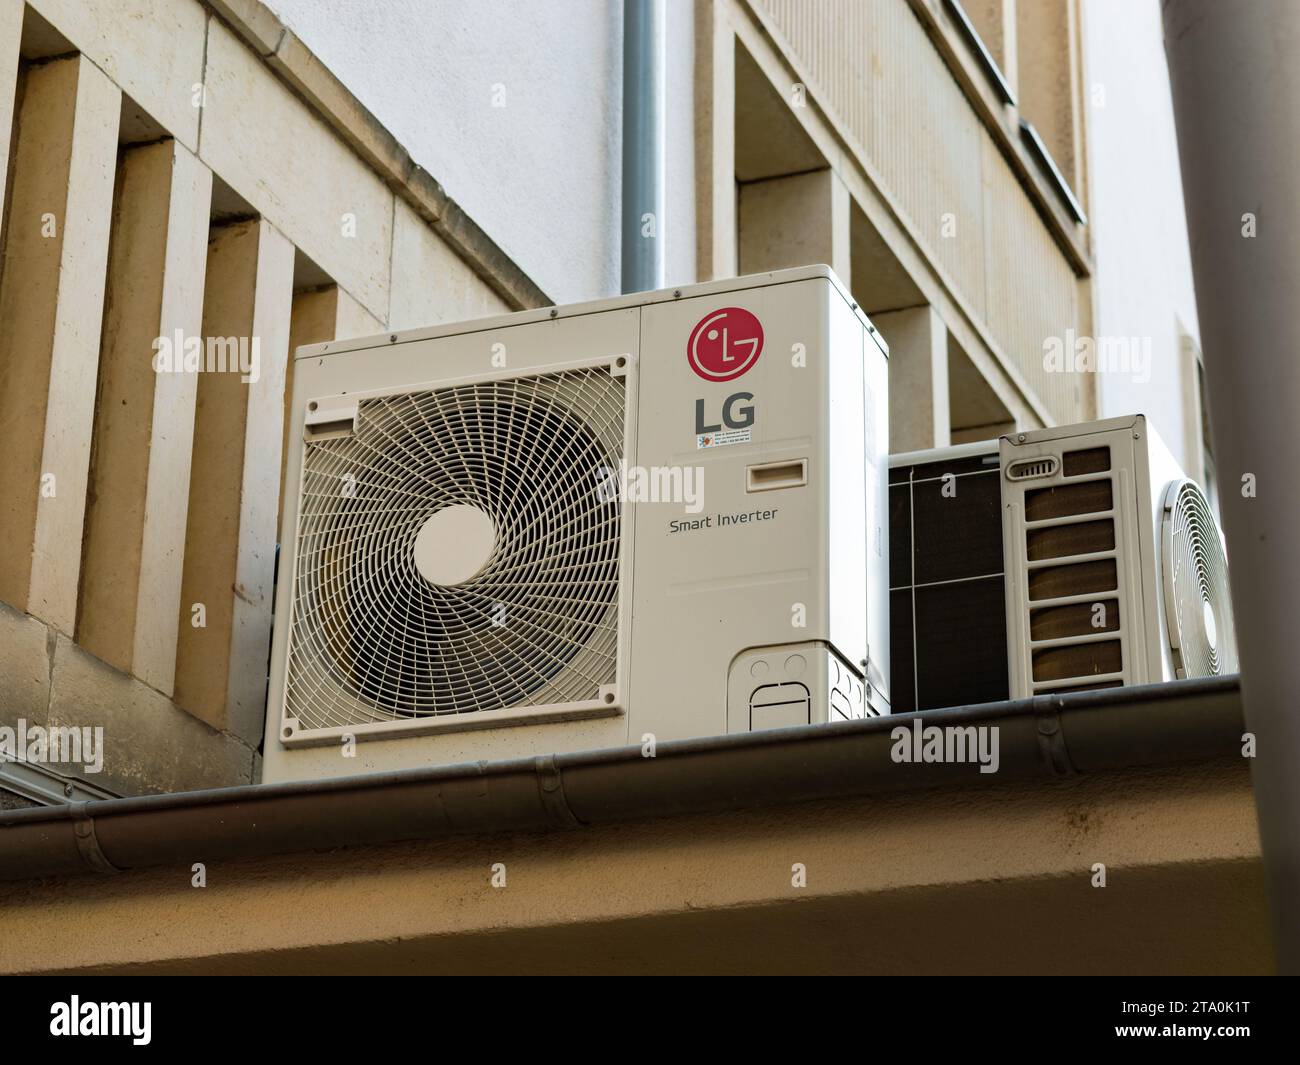 LG Smart Inverter air conditioner on a building exterior. Technology equipment to cool down temperature inside of a house. Ventilator fan outdoors. Stock Photo